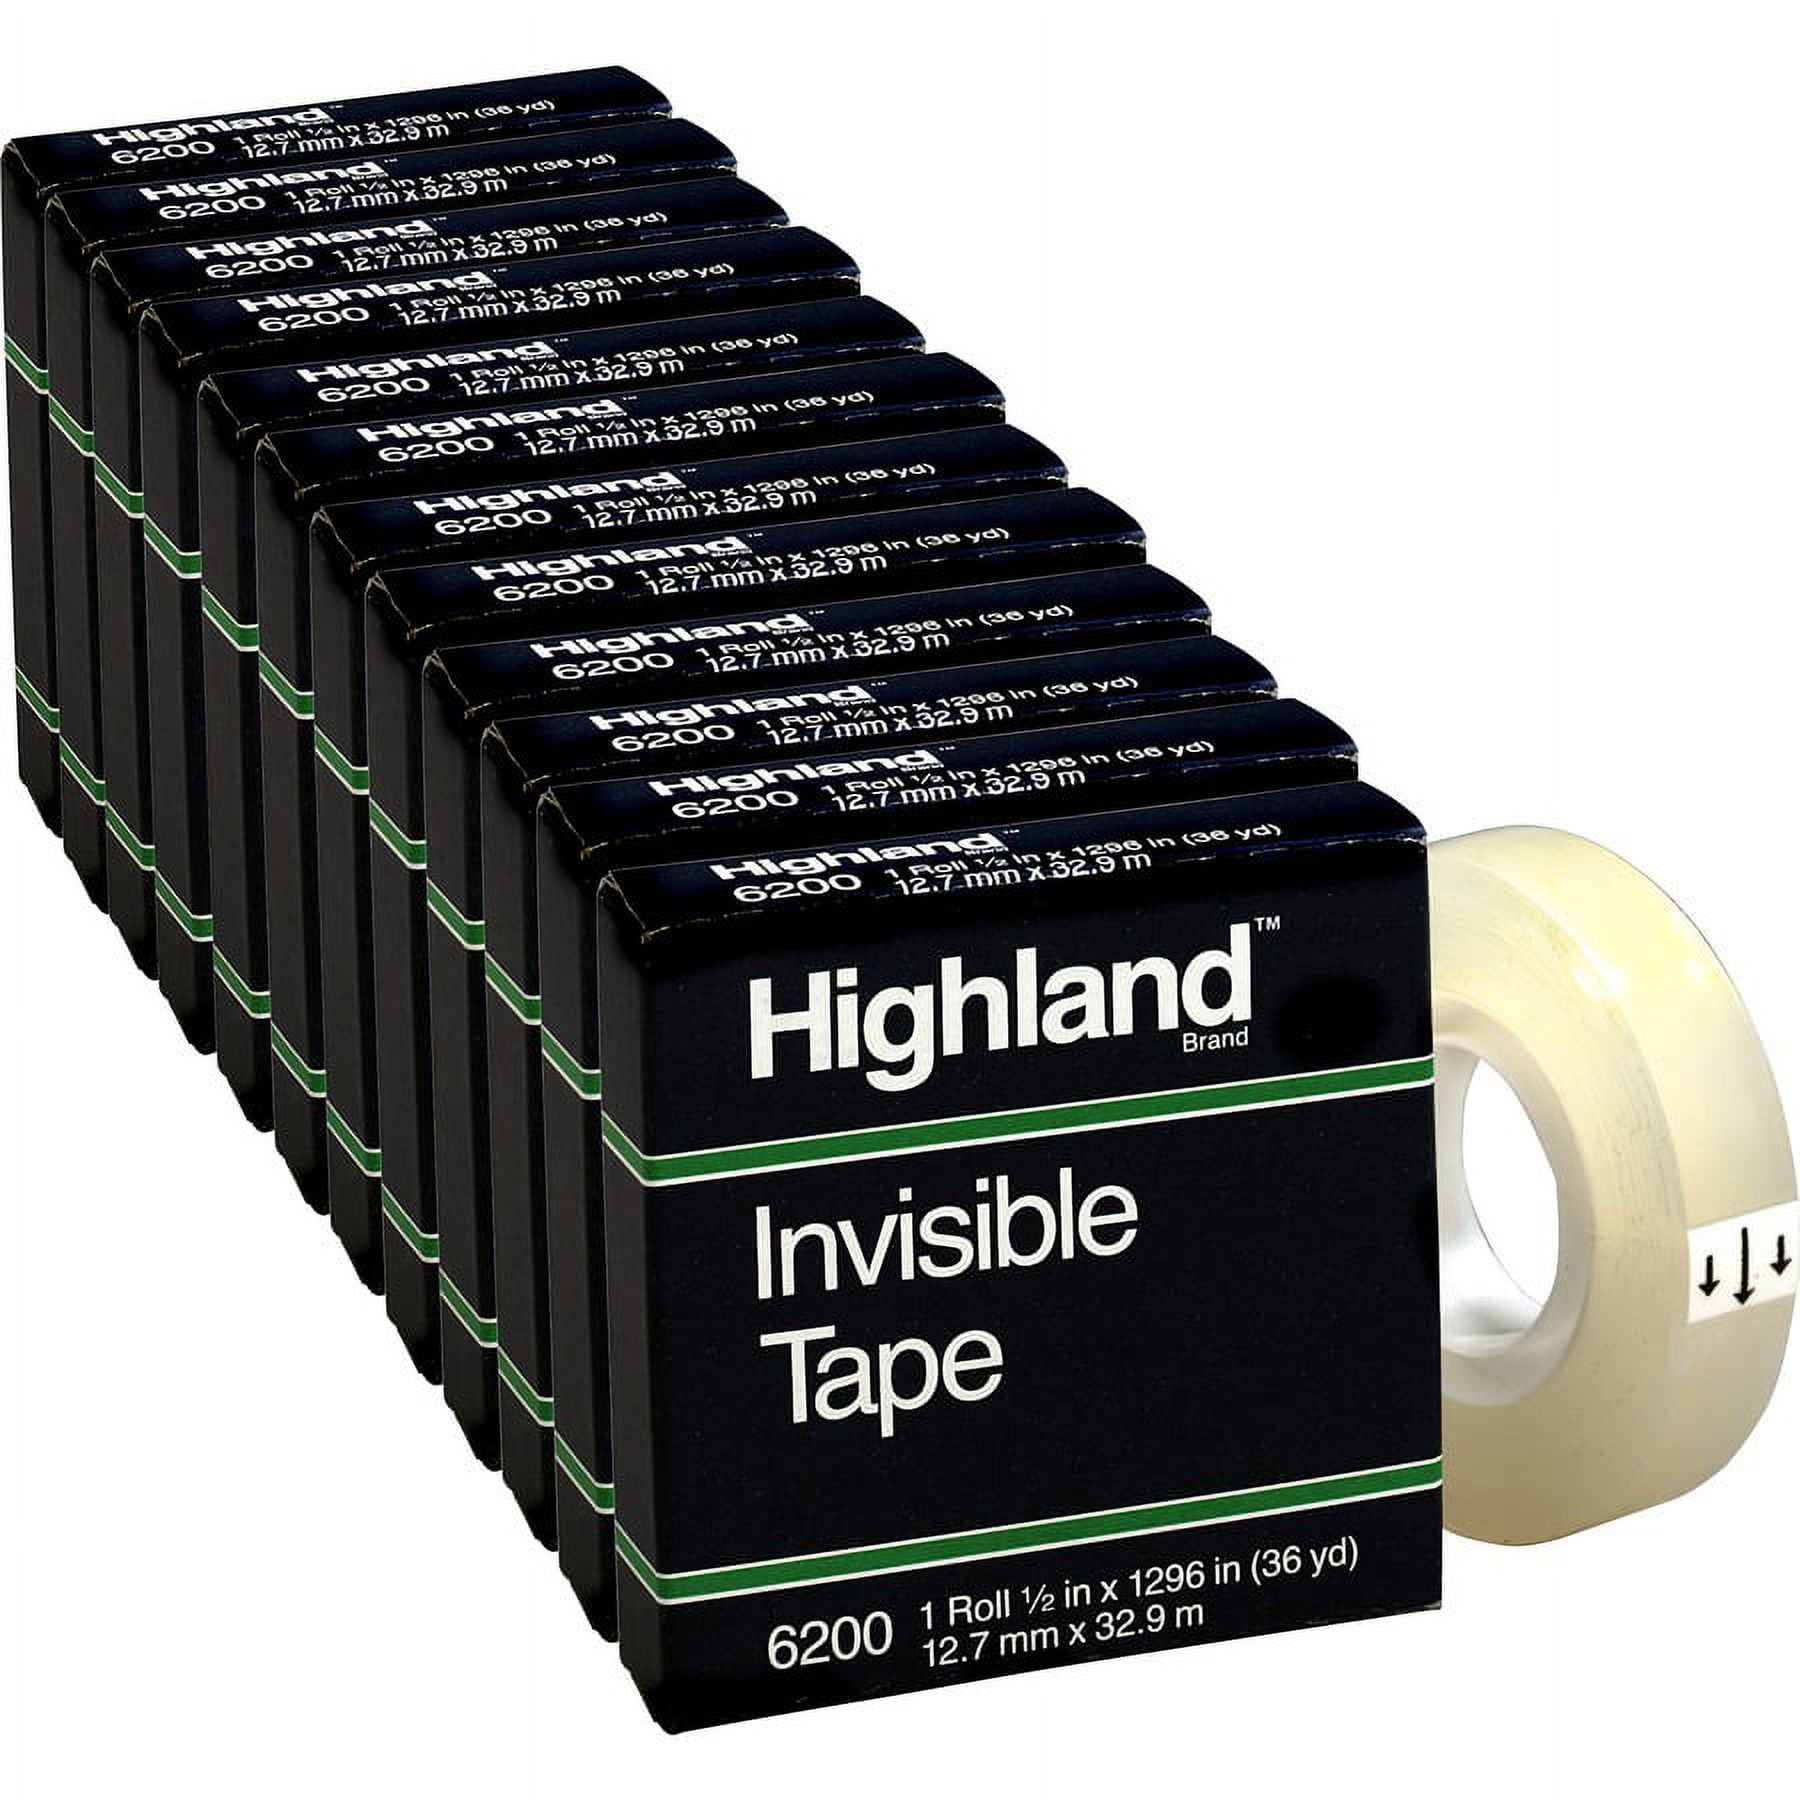 White Polyimide Tape, Matte Finish, 2 x 36 yds.